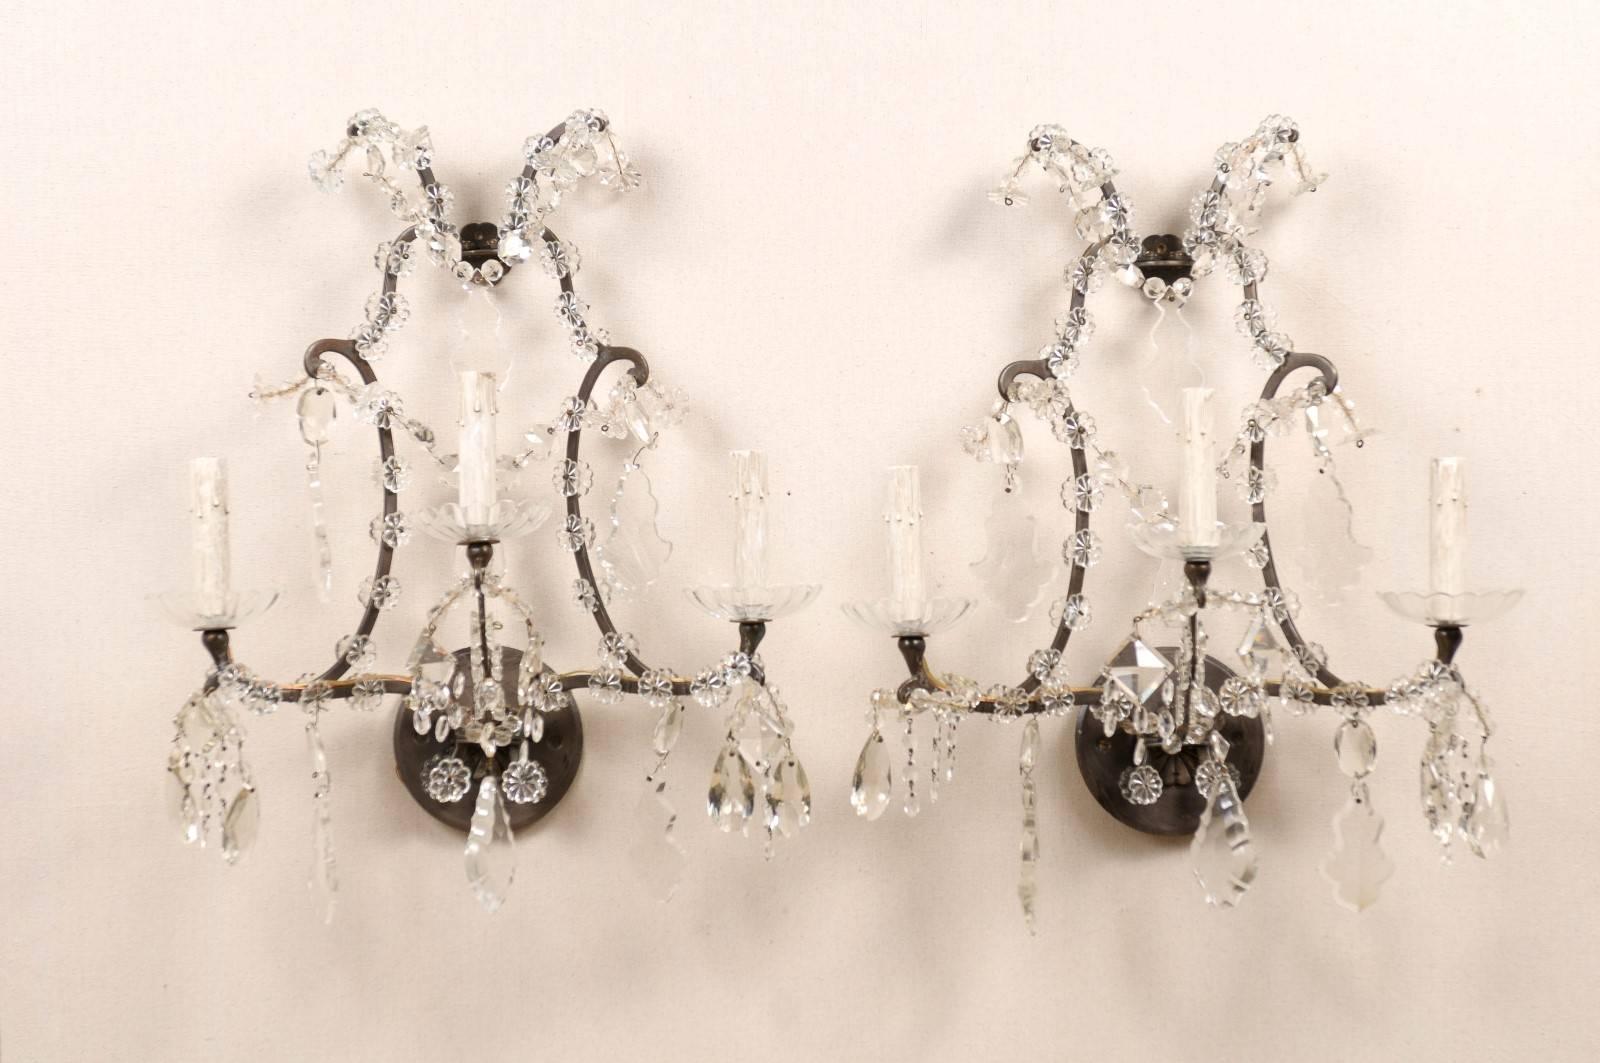 A pair of crystal three-light sconces. This pair of Italian vintage sconces is made of a scrolled armature decorated with small size crystal flowers and glass bobèches. The sconces are also decorated with various faceted crystals. The back plate